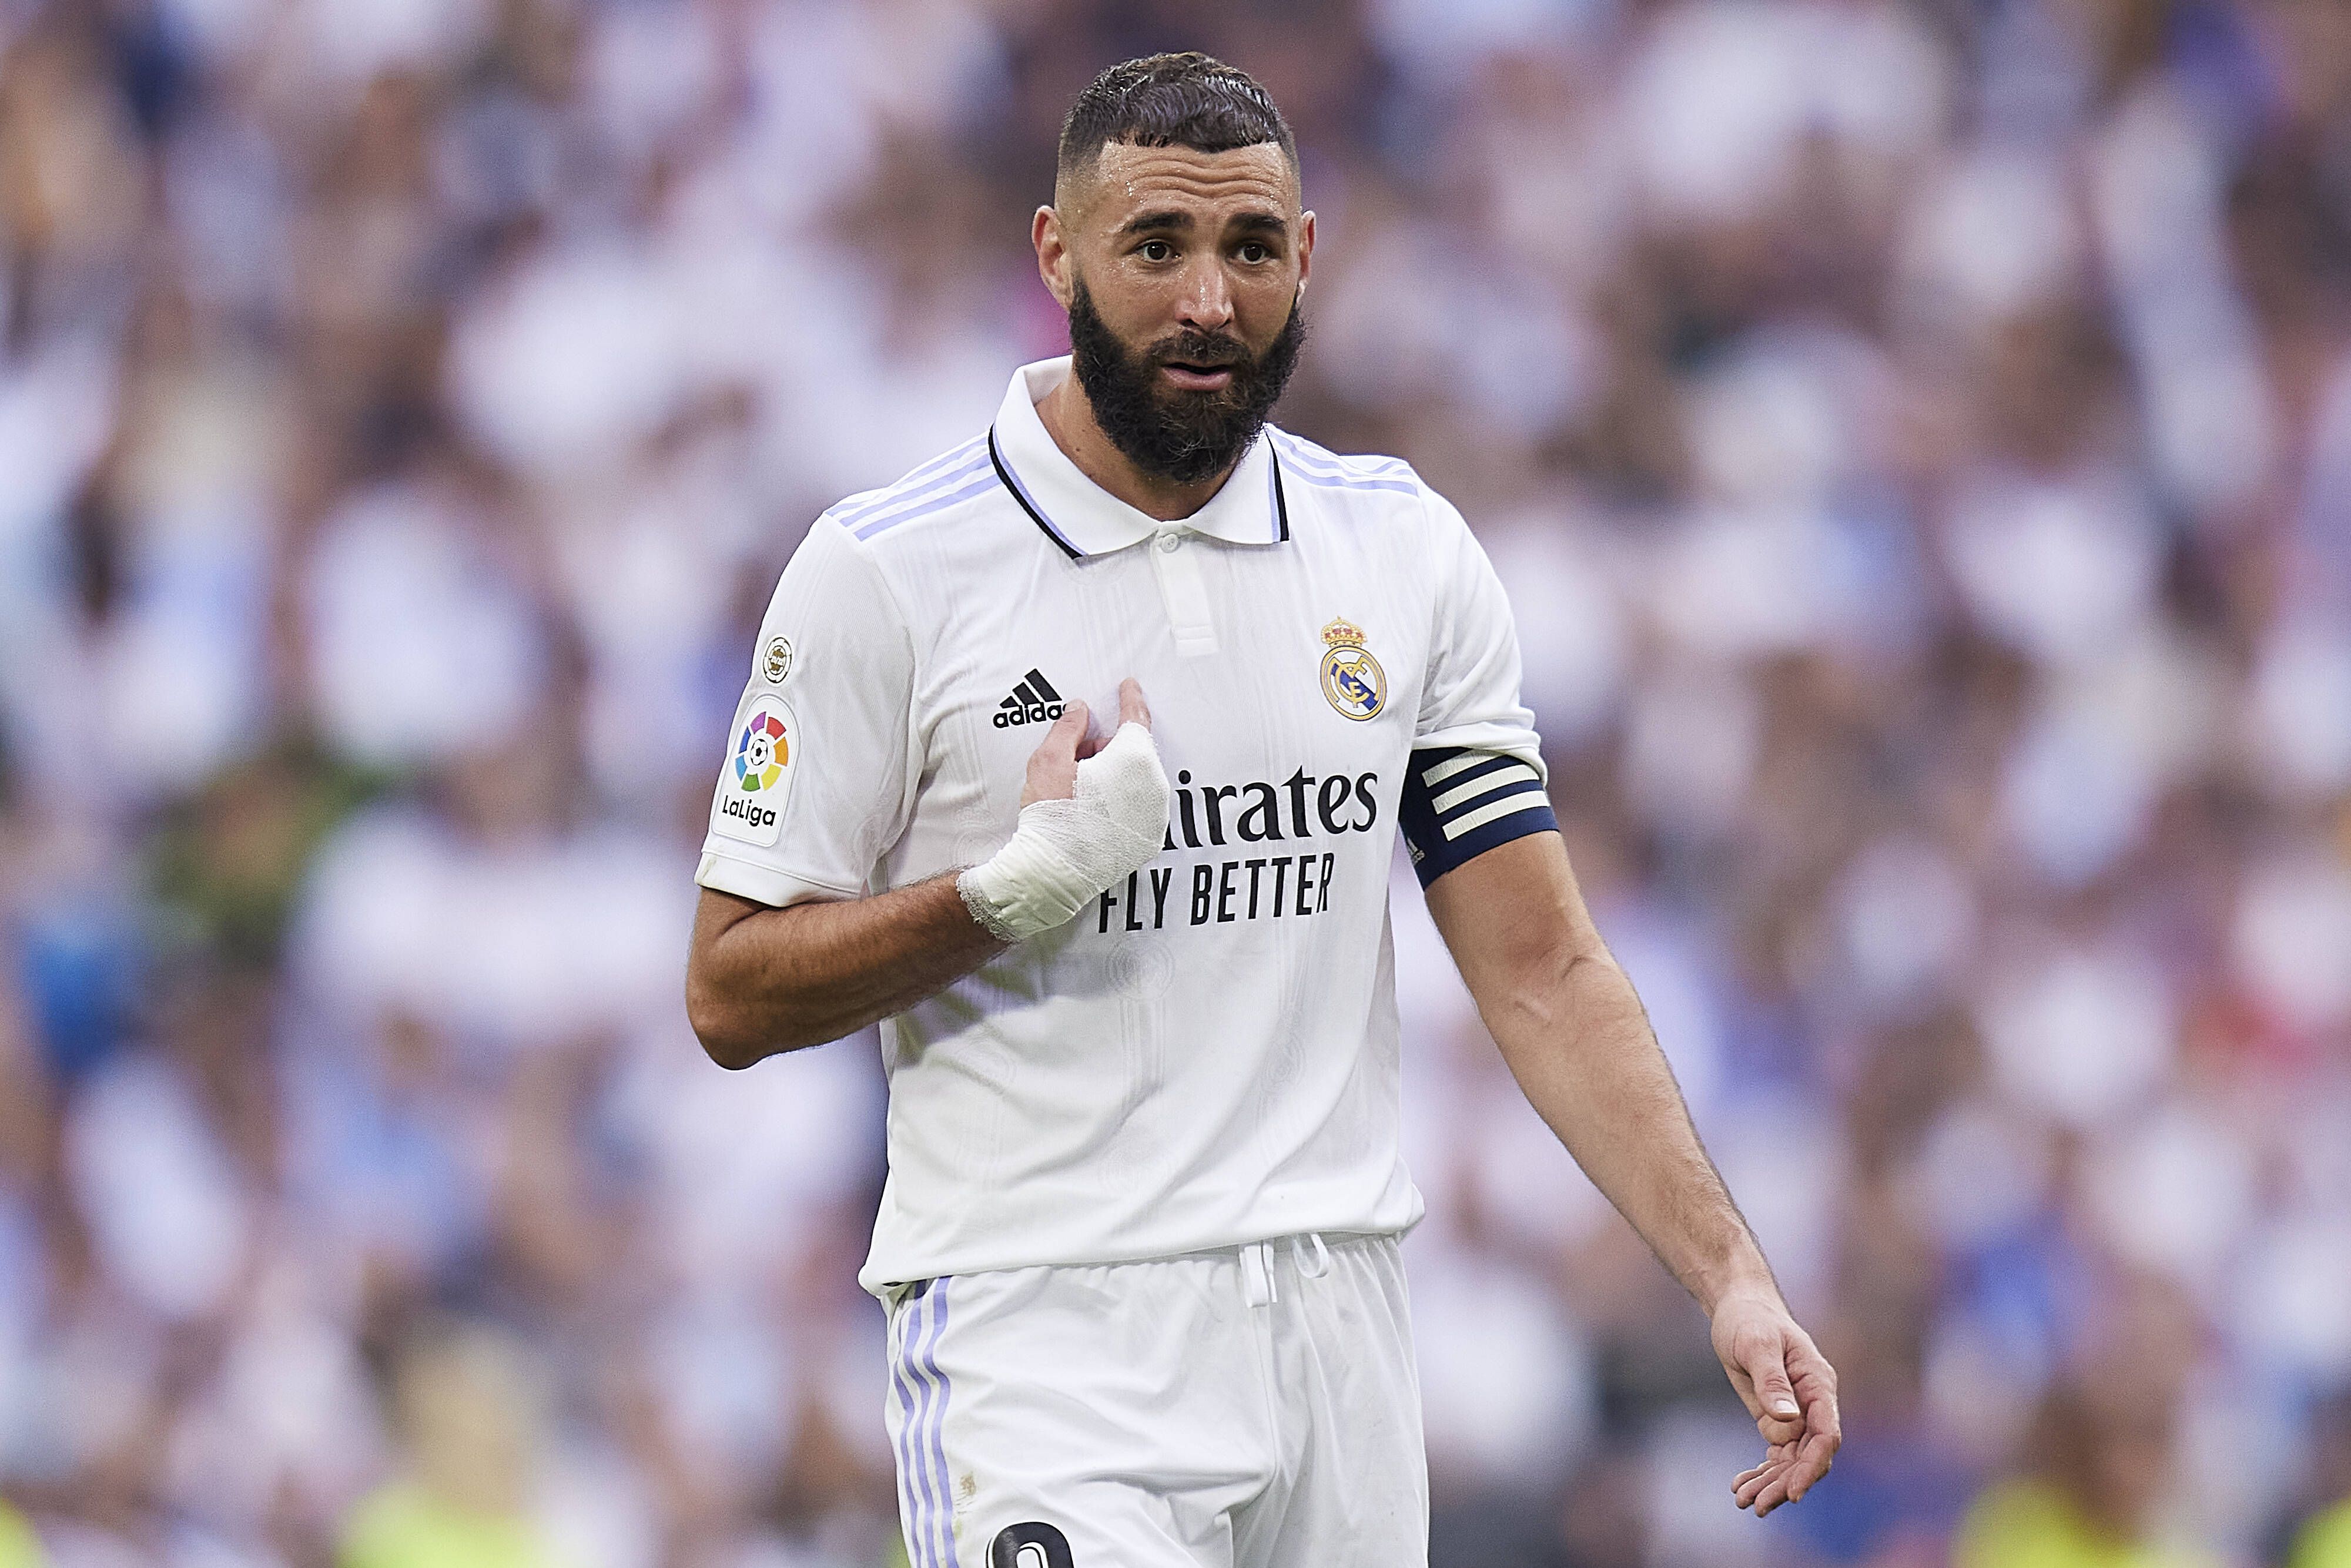 Real Madrid could welcome Ballon d'Or winner Benzema back.